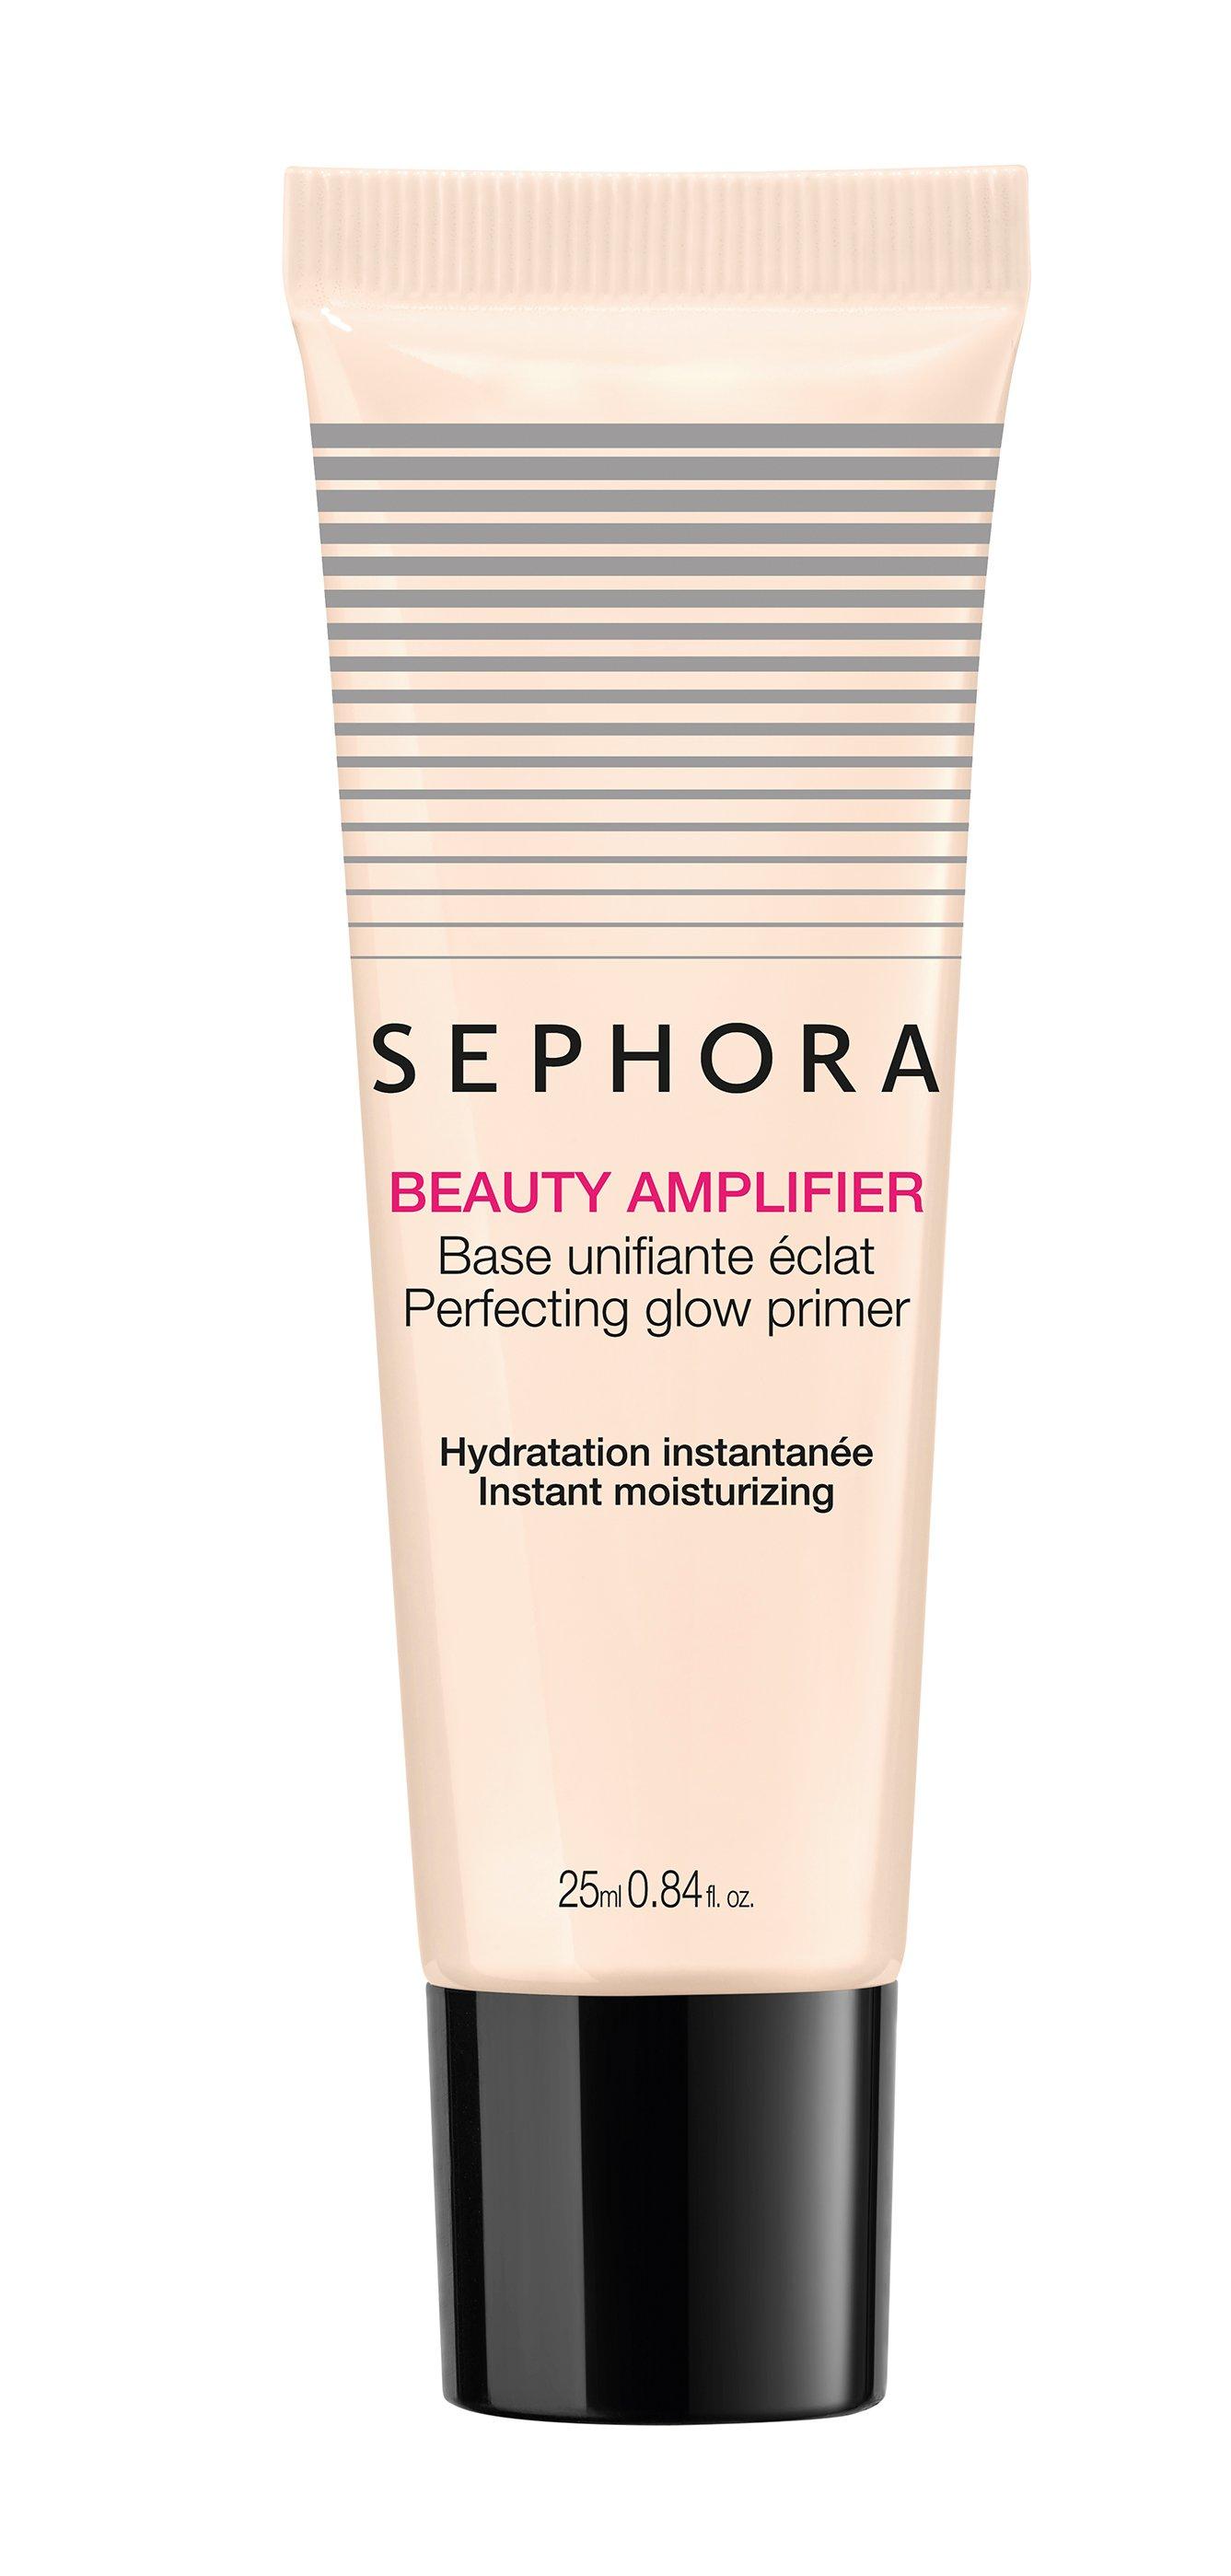 Image of SEPHORA Beauty Amplifier - Perfecting Glow Primer - 25ml